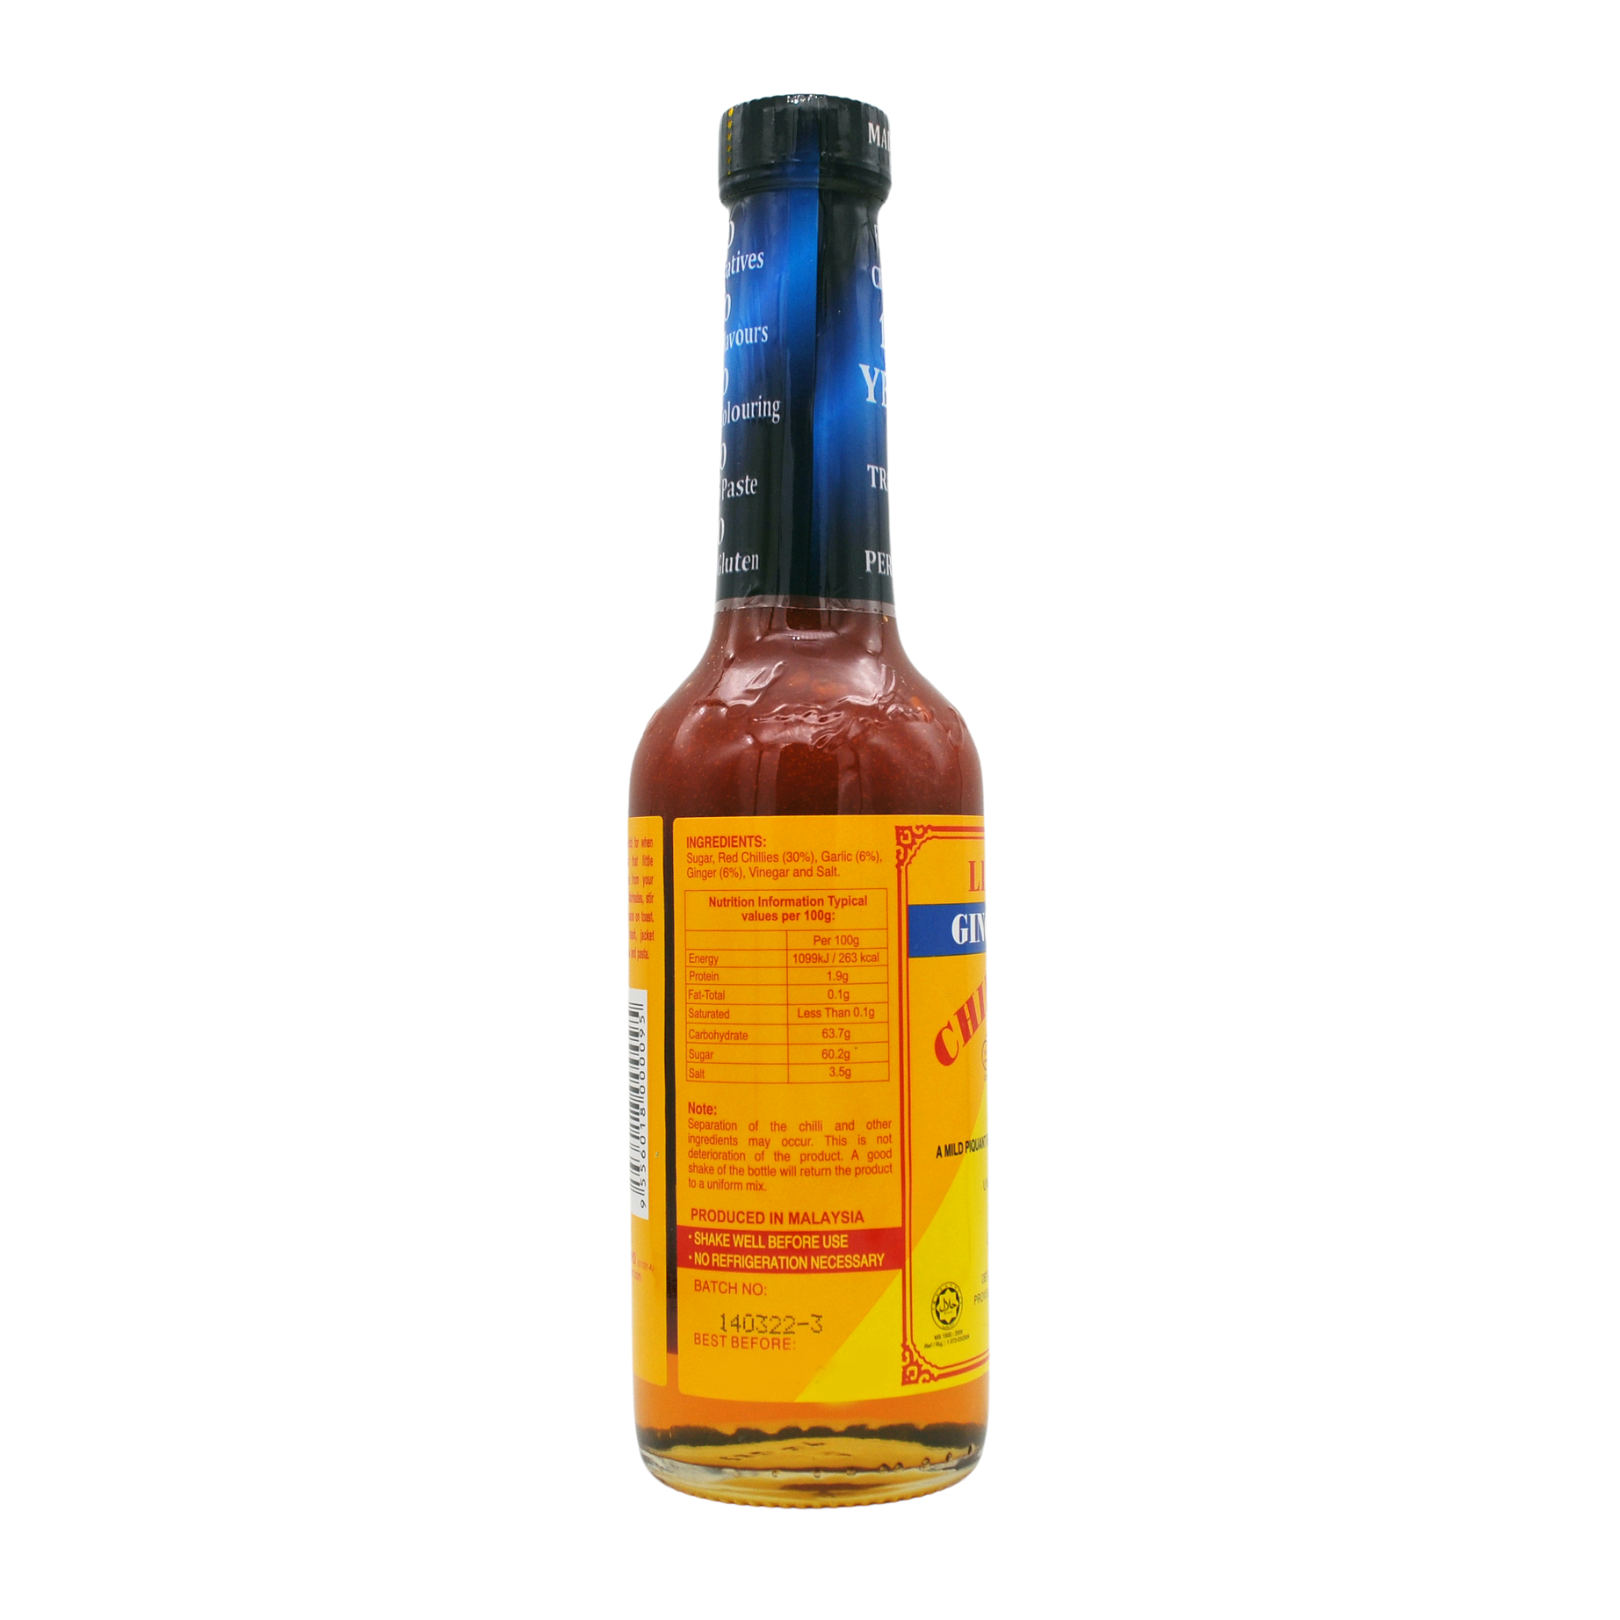 Chilli Sauce Ginger and Garlic Flavour 358g by Linghams